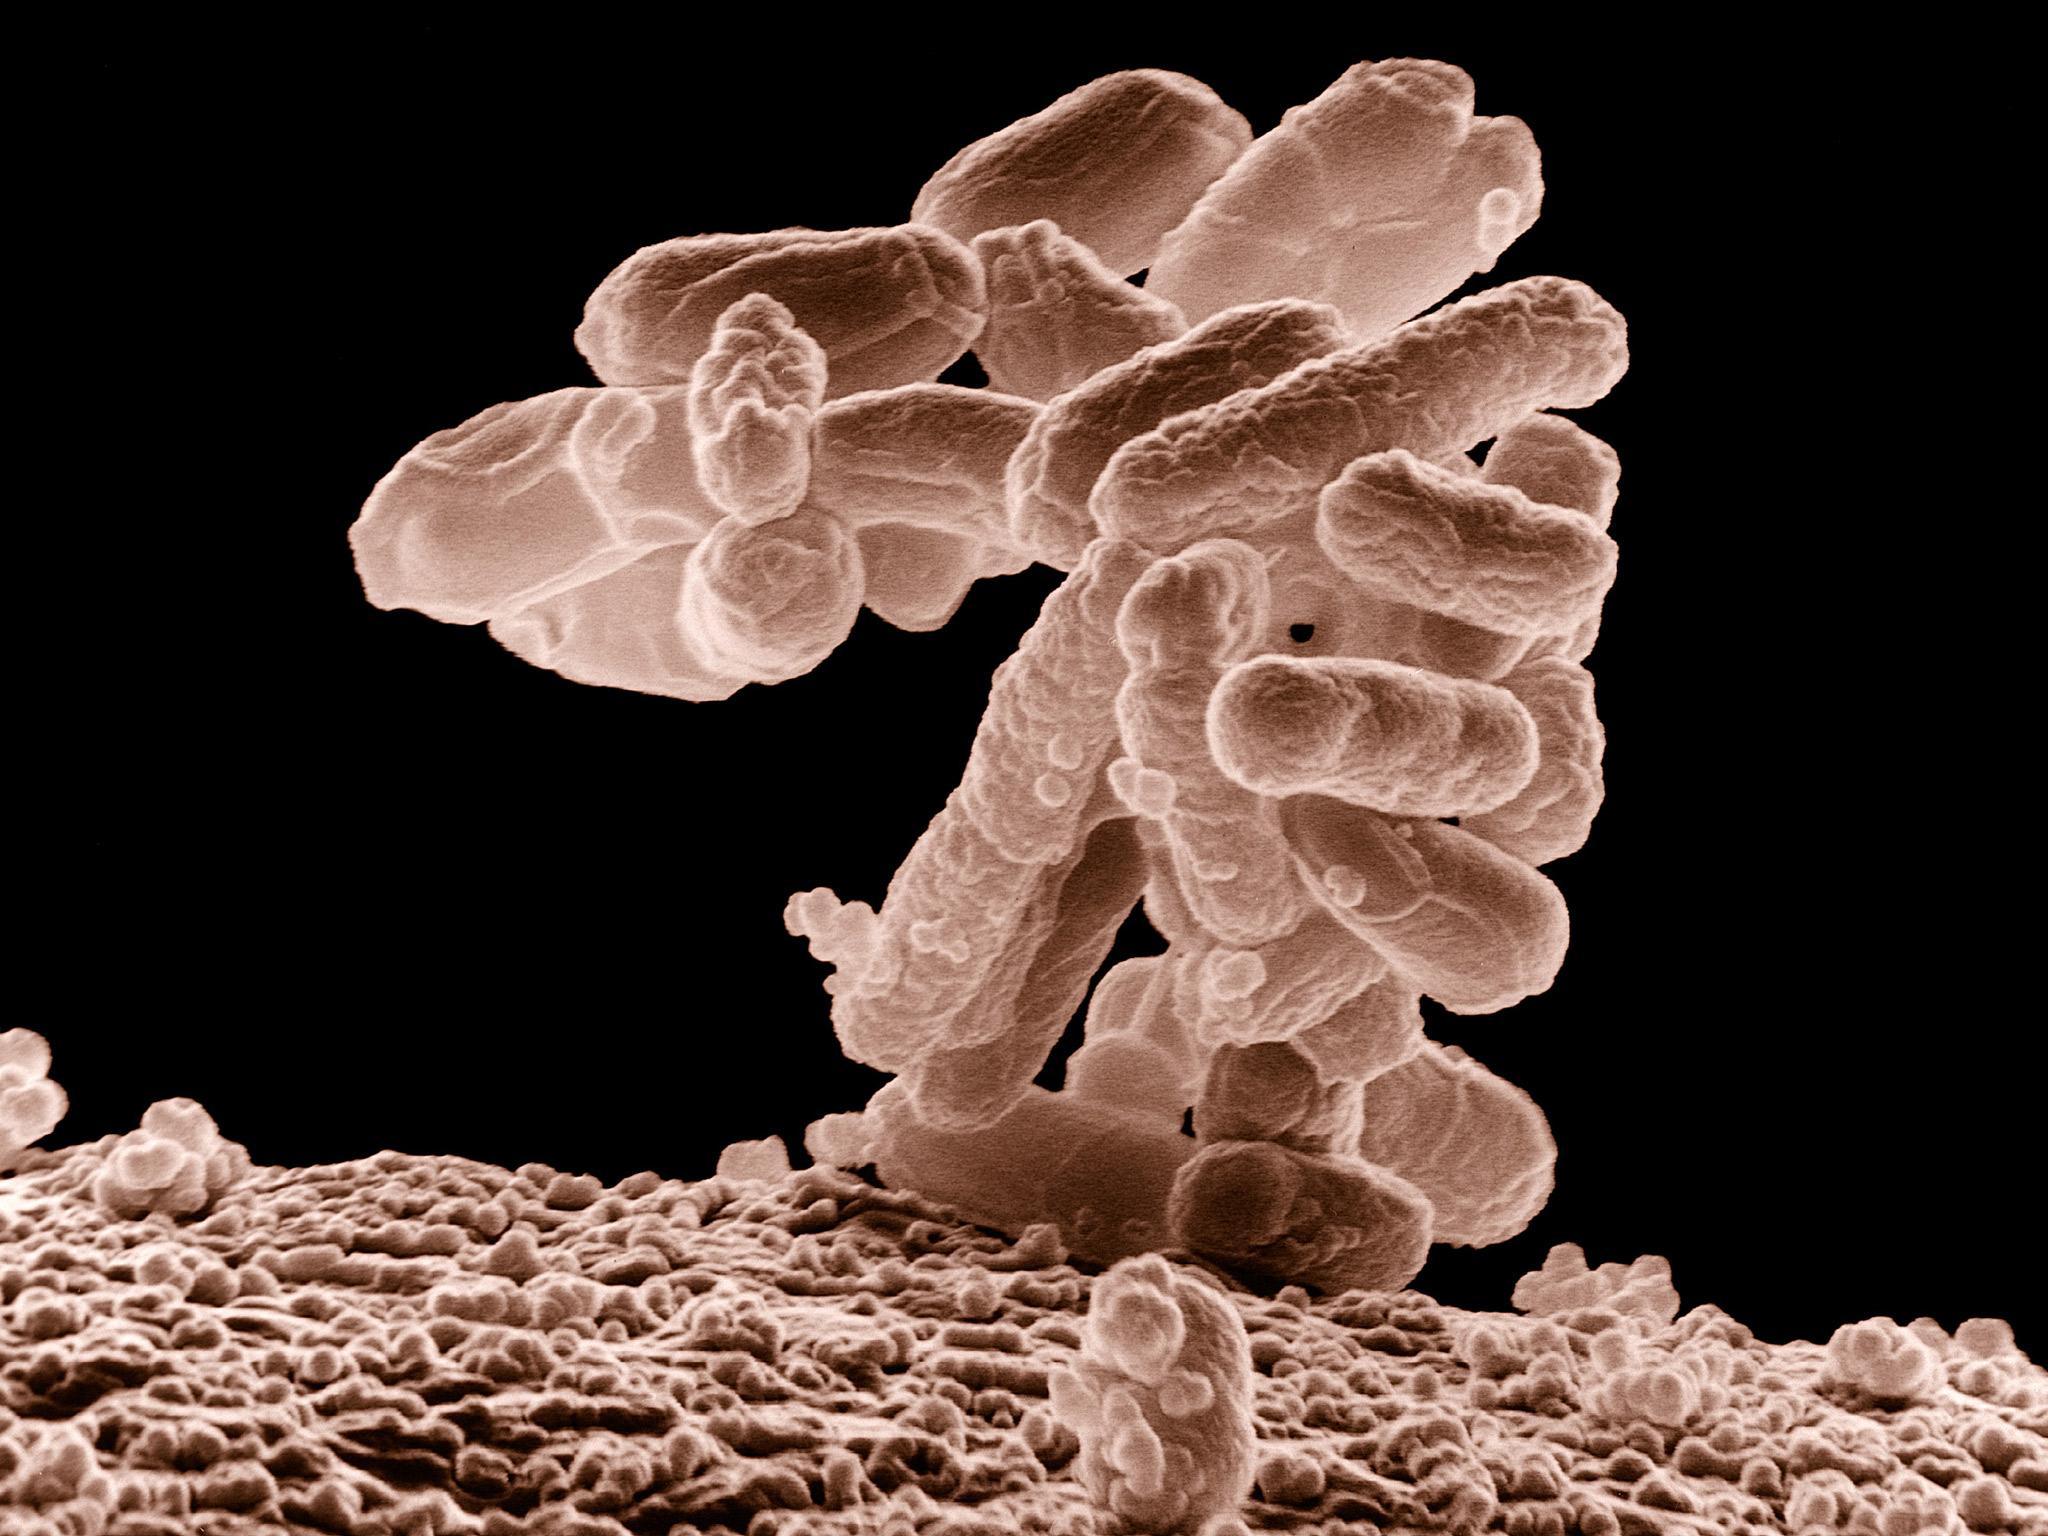 Low-temperature electron micrograph of a cluster of E. coli bacteria